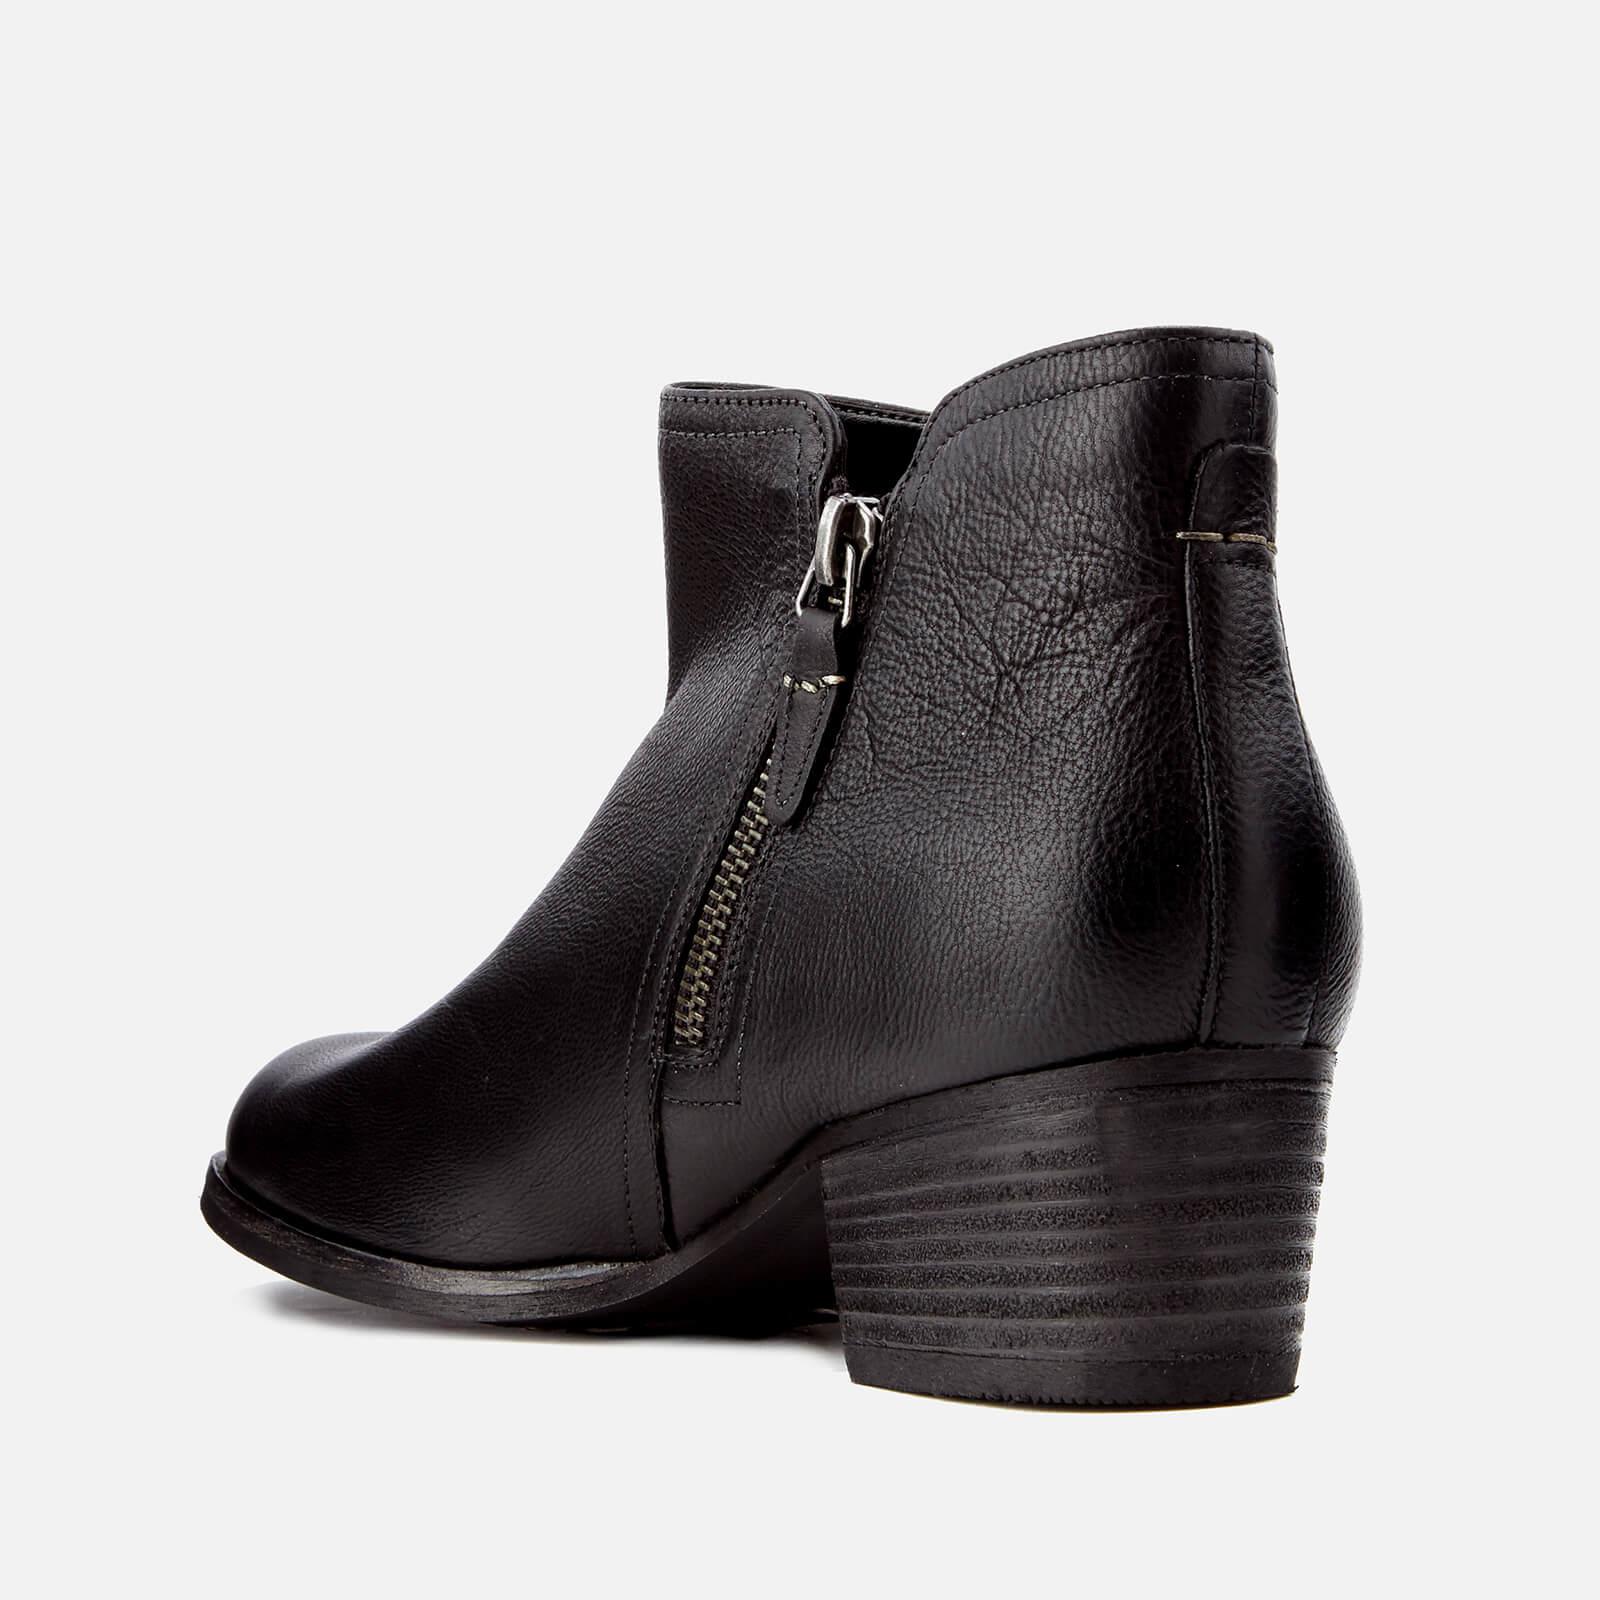 Lyst - Clarks Women's Maypearl Ramie Leather Ankle Boots in Black